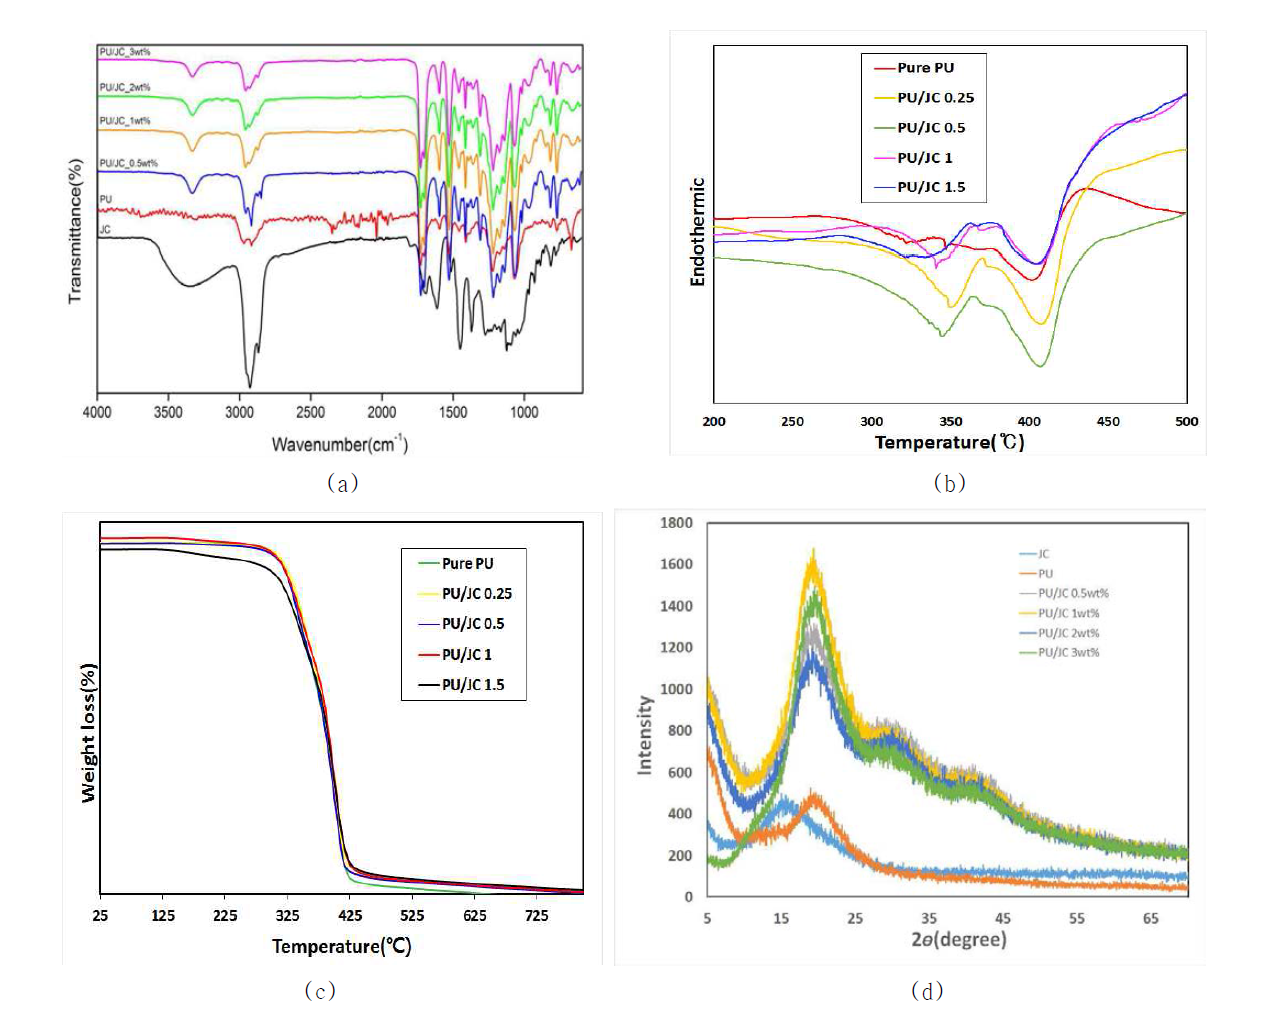 (a)FT-IR spectra of electrospun pristine PU and PU nanoweb with different concentration of JC extract. (b) DSC graphs of electrospun pristine PU, PU/JC nanofibrous mat with different concentration of JC extract. (c) TGA curves of electrospun pristine PU, PU/JC nanofibrous mat with different concentration of JC extract. (d) XRD patterns of electrospun pristine PU and PU nanoweb with different concentration of JC extract